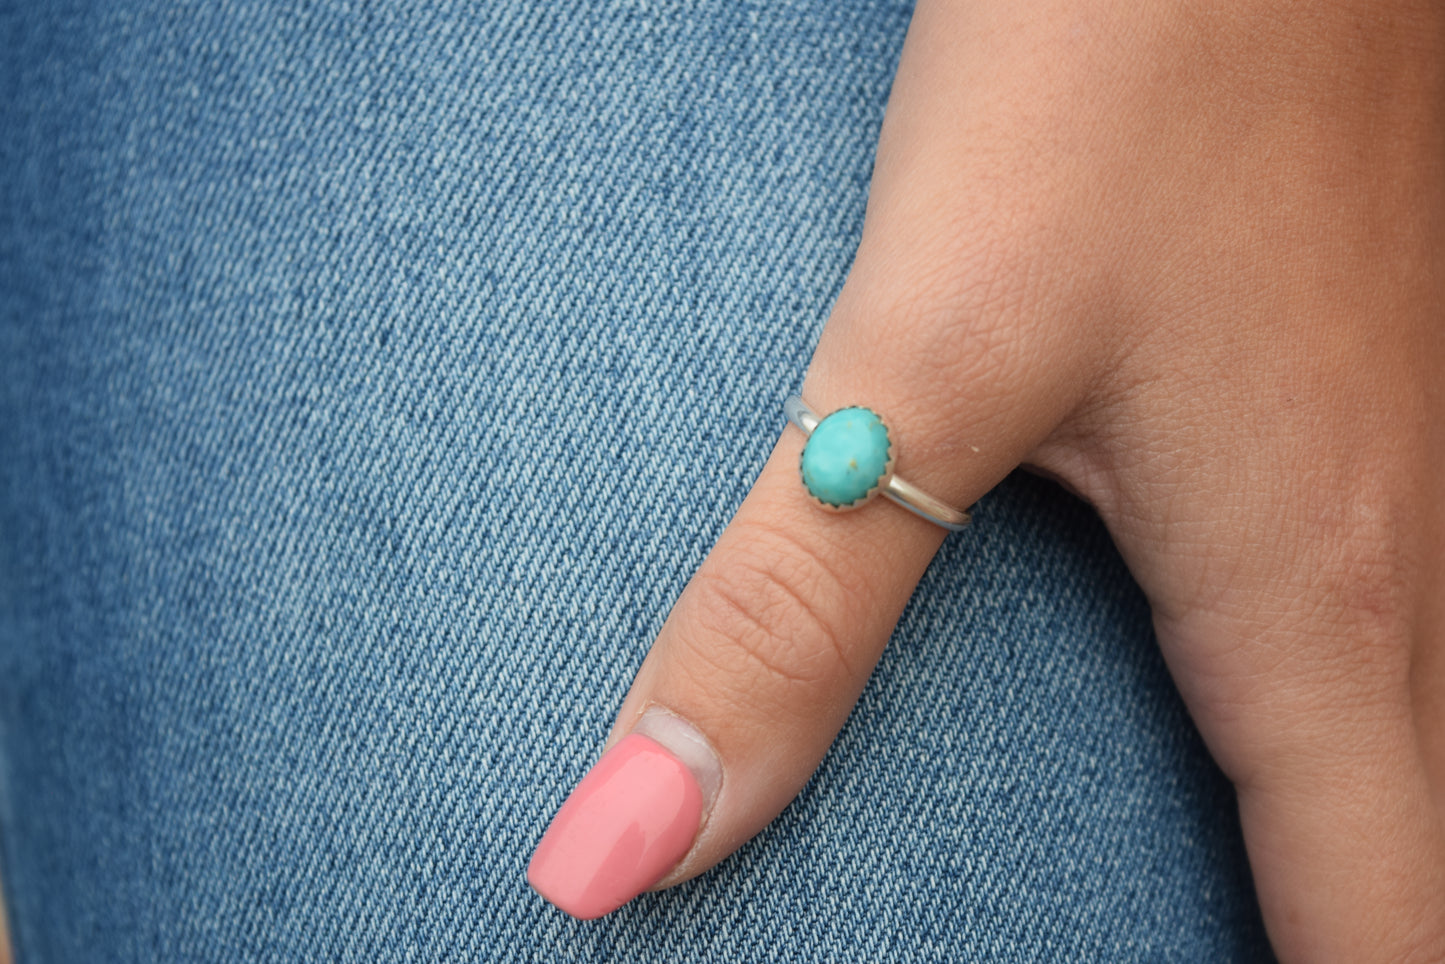 The Turquoise Stone Oval Ring